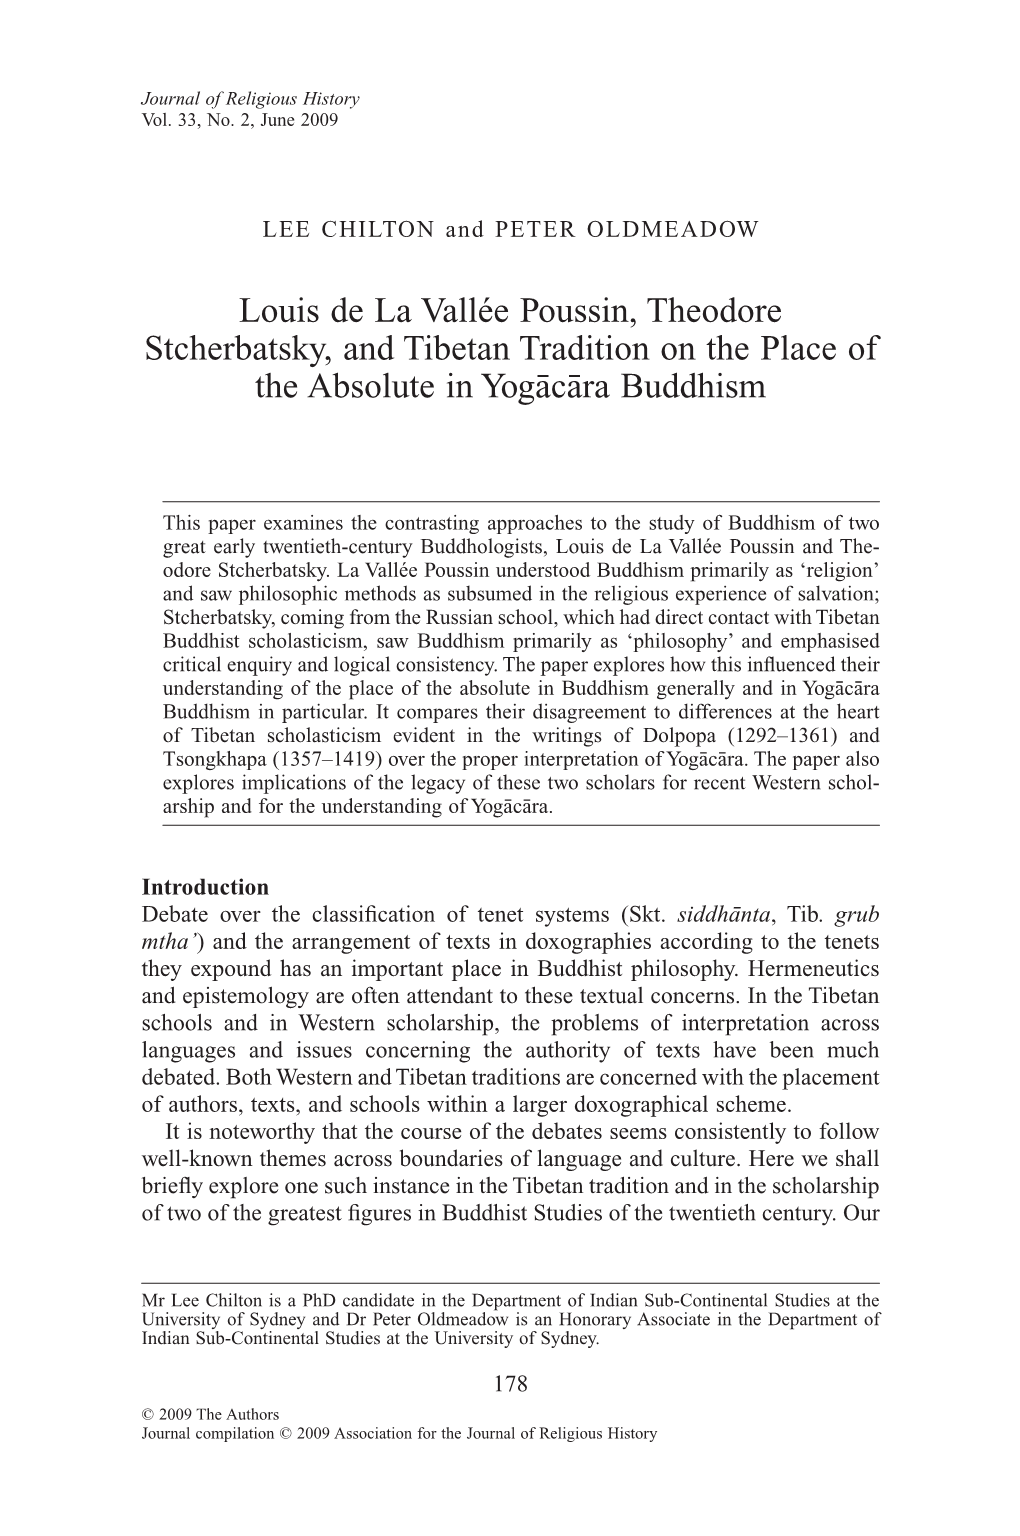 Louis De La Vallée Poussin, Theodore Stcherbatsky, and Tibetan Tradition on the Place of the Absolute in Yoga¯Ca¯Ra Buddhism